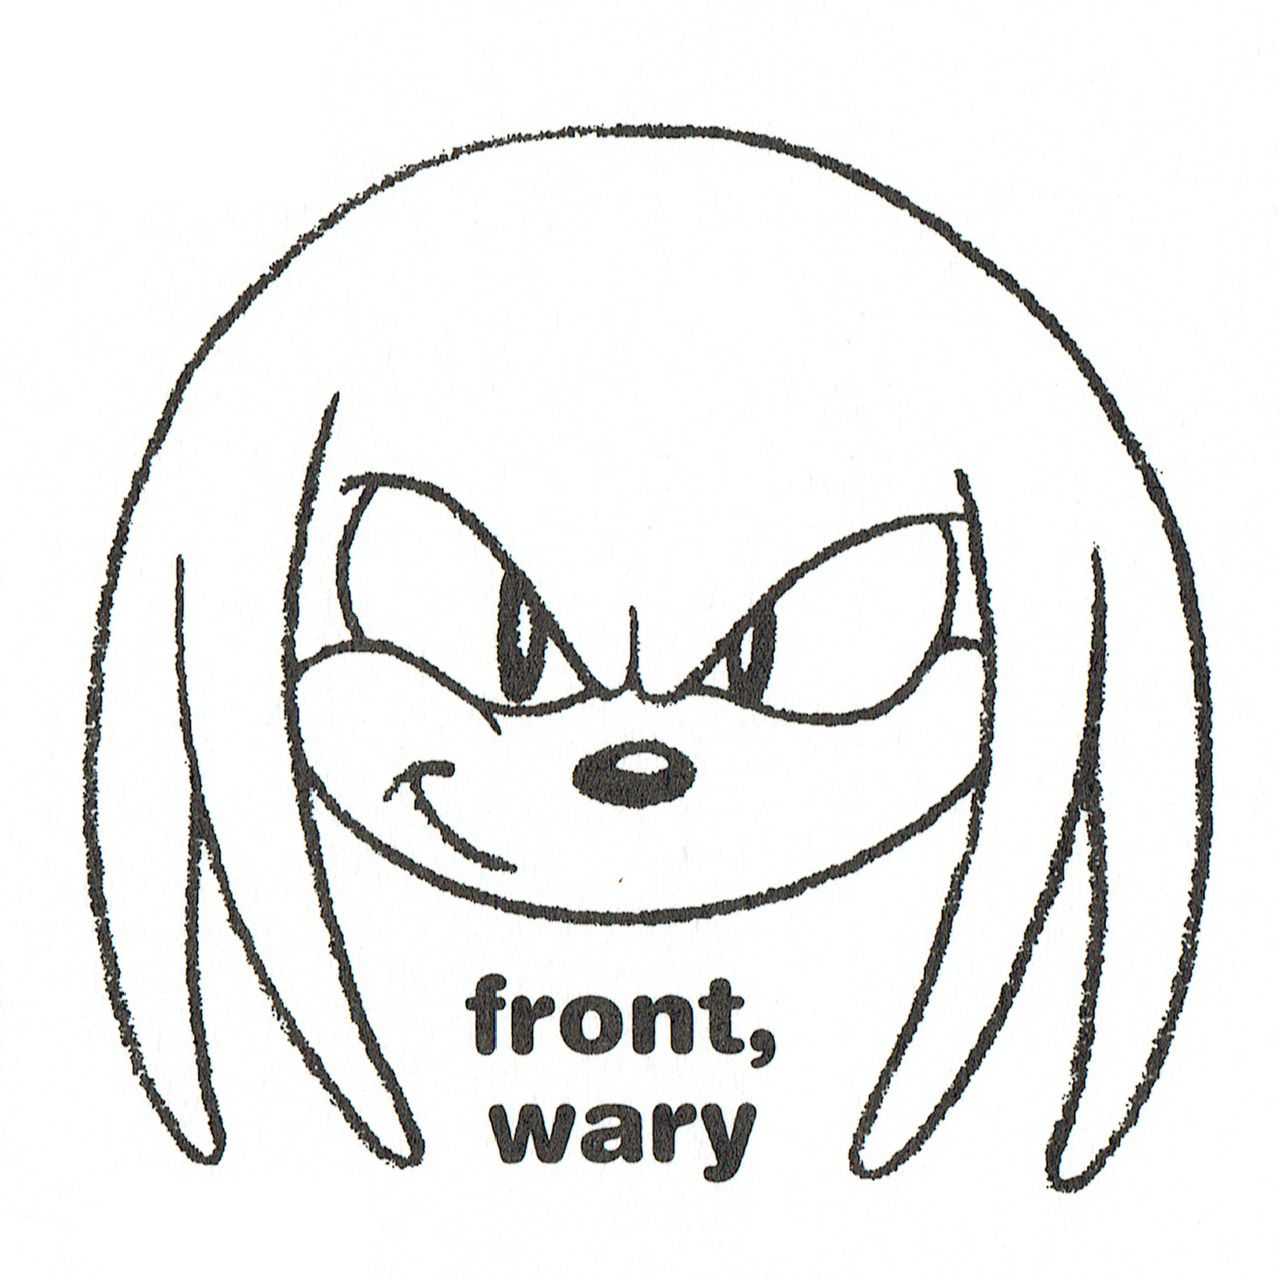 The Video Game Art Archive - How to draw Knuckles’ head, from ‘How to